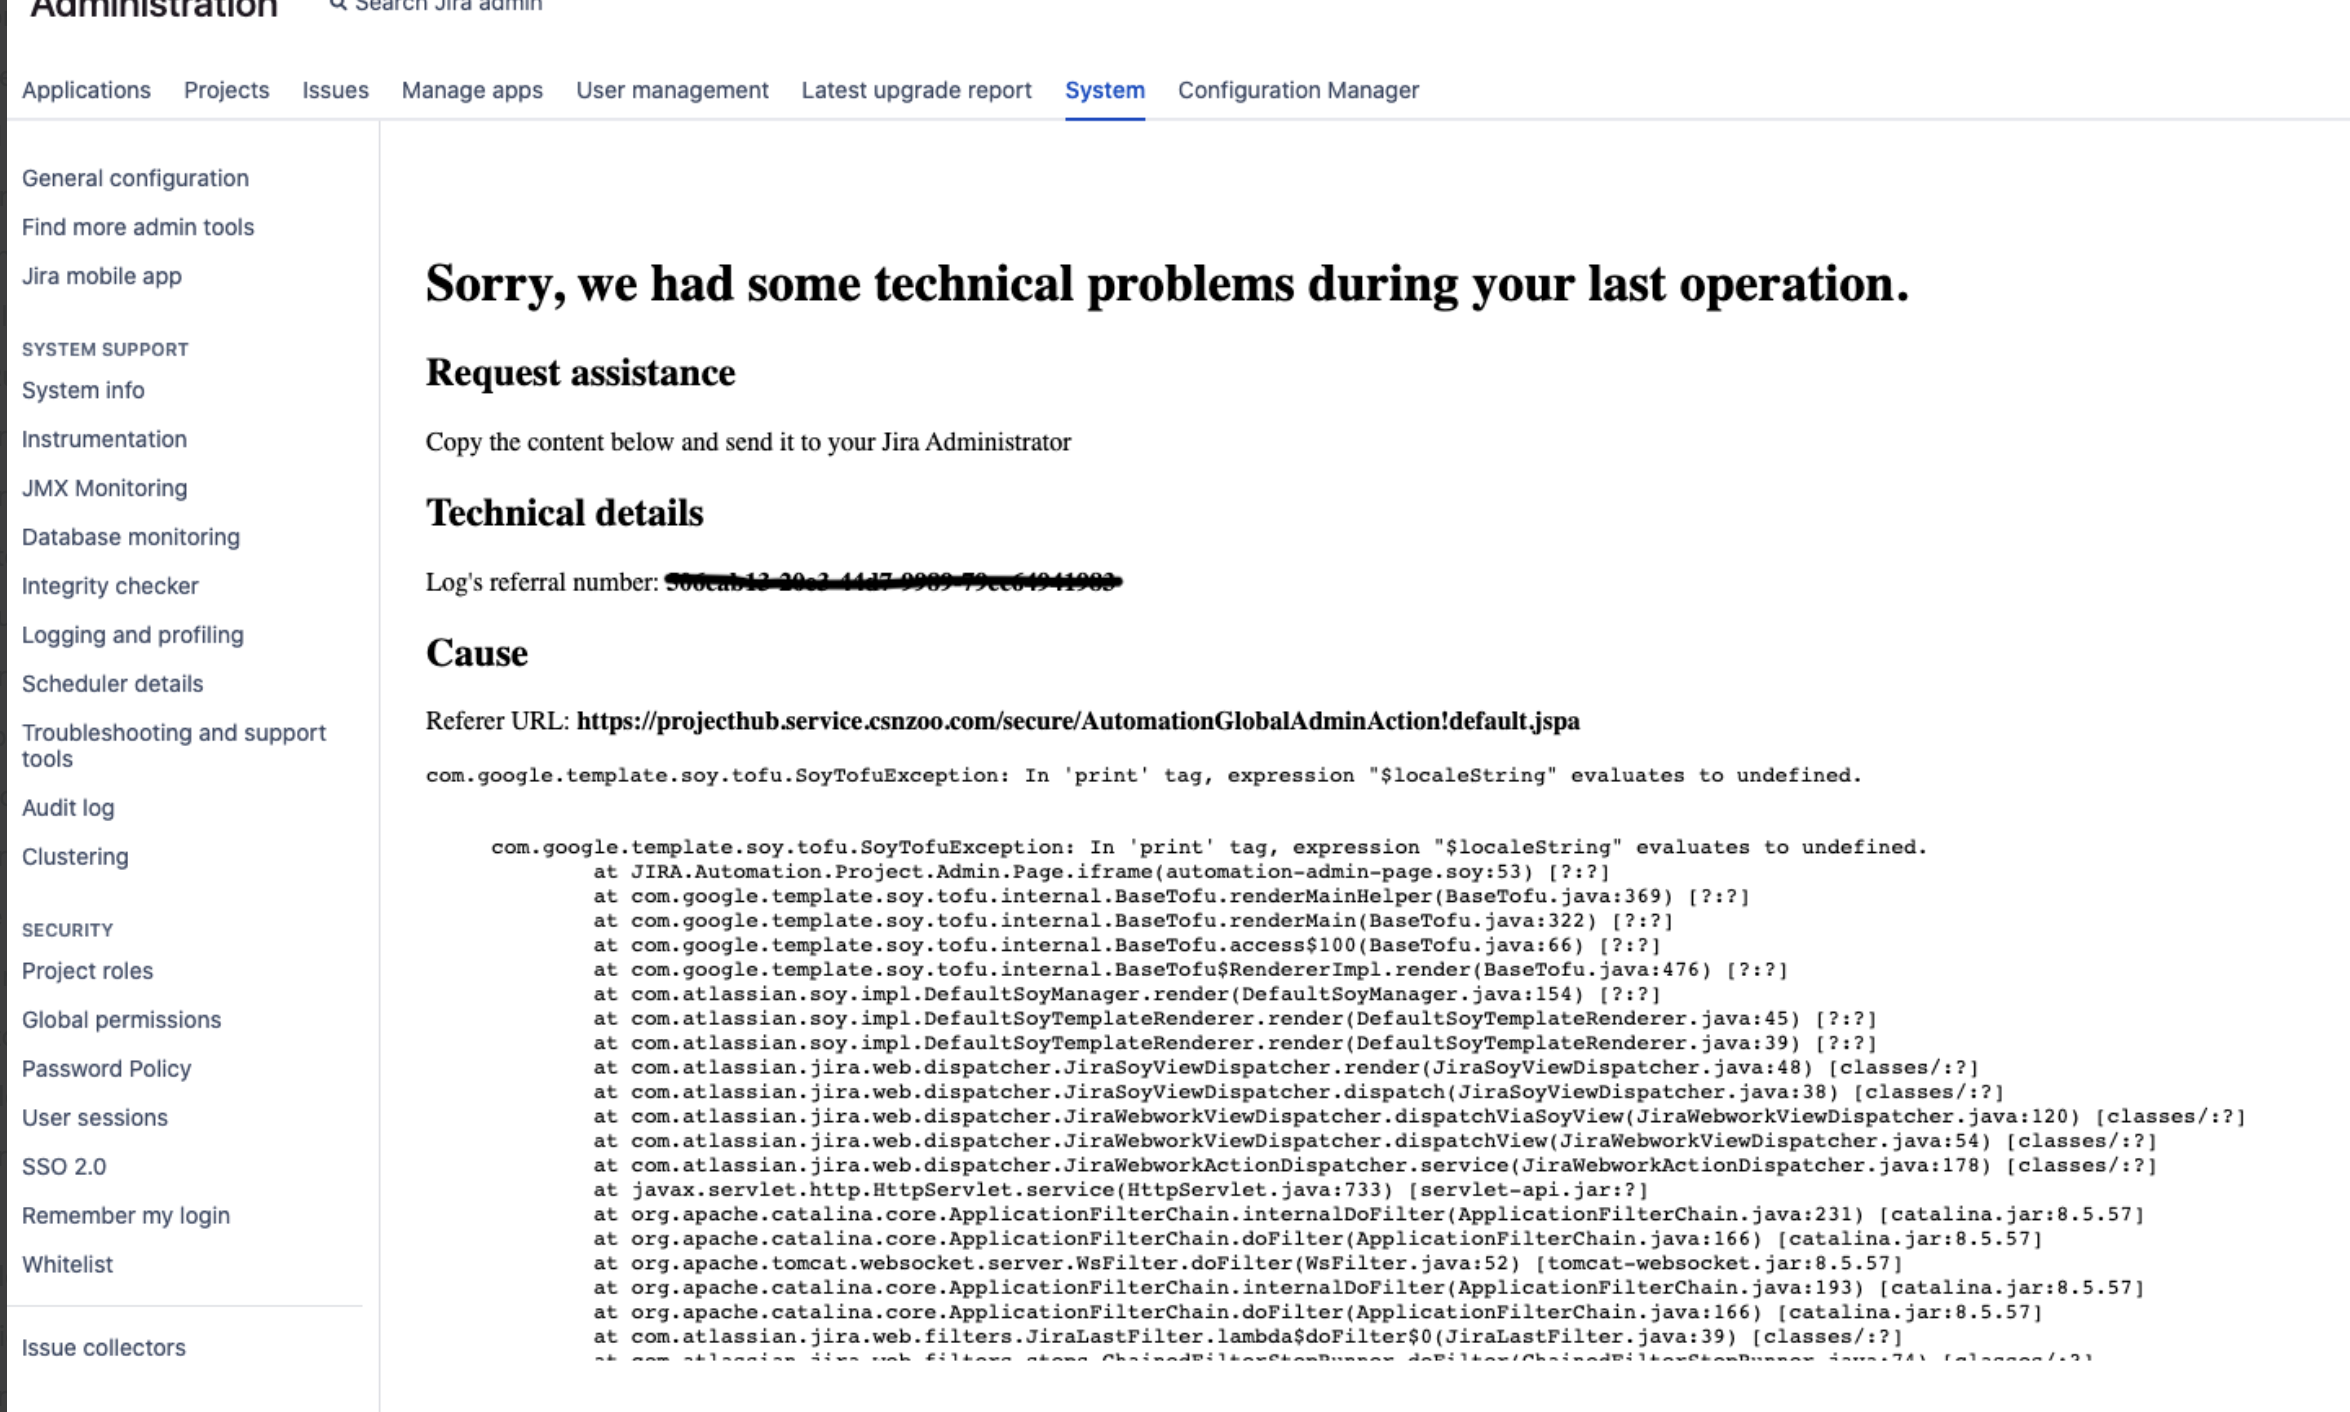 Error in global automation page "Sorry we had some technical problems during your last operations"